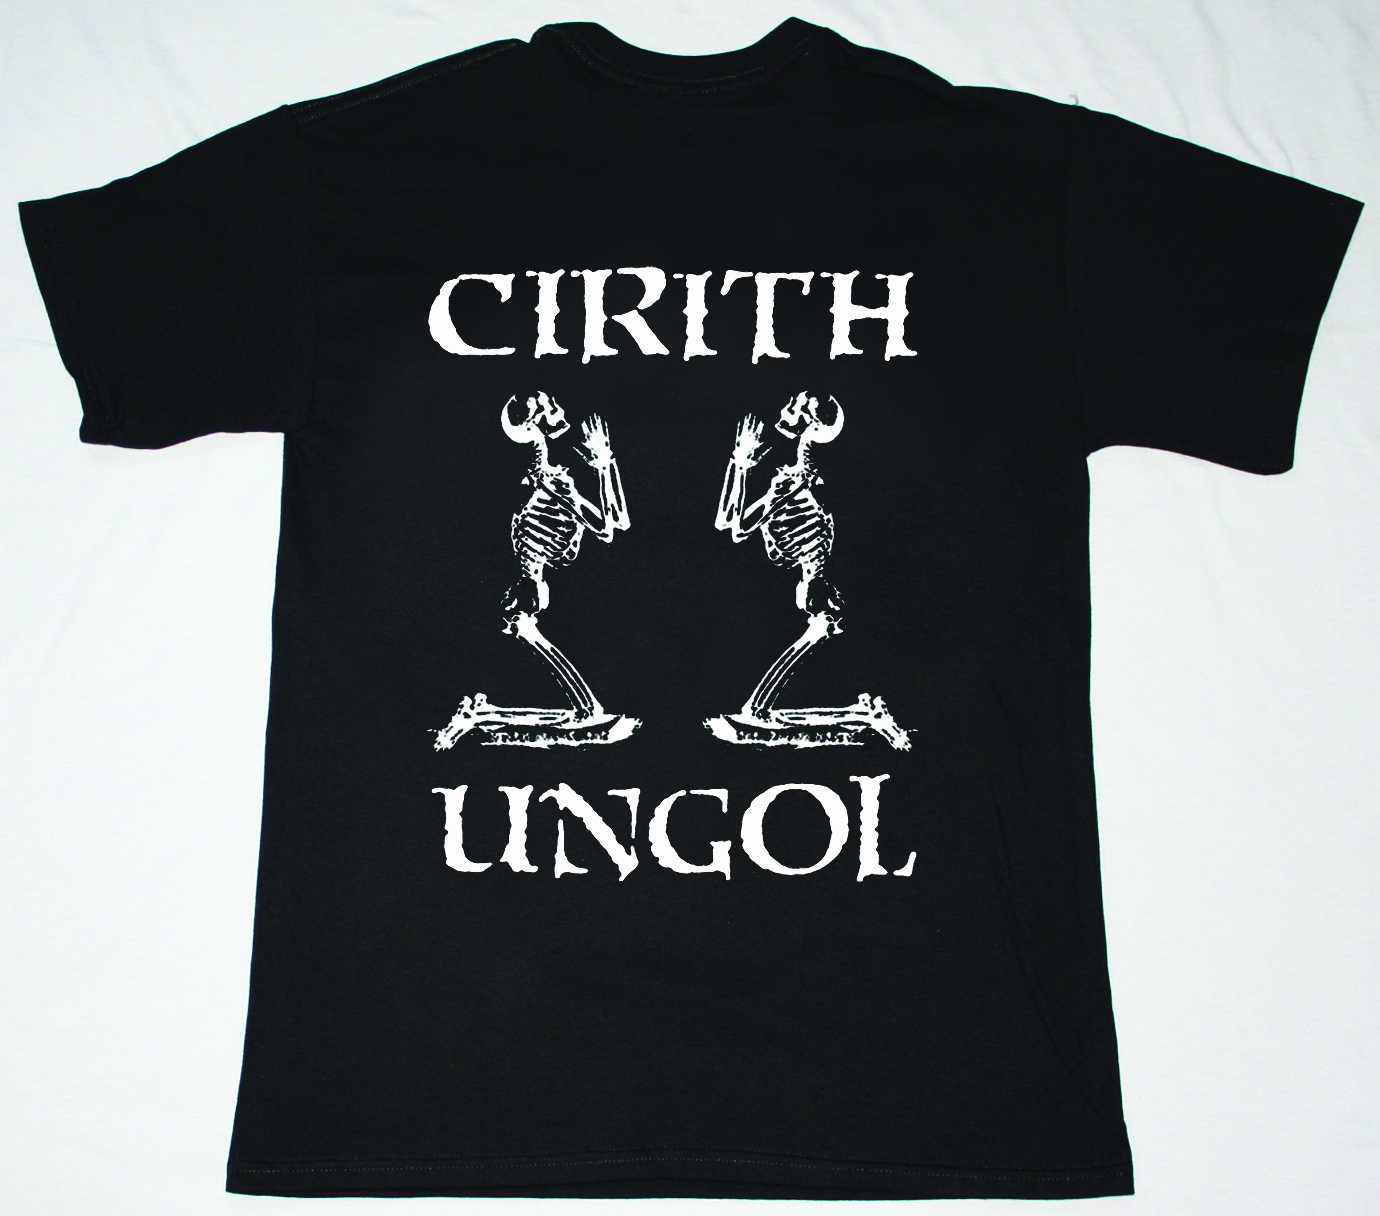 CIRITH UNGOL FROST AND FIRE 1980 NEW BLACK T-SHIRT